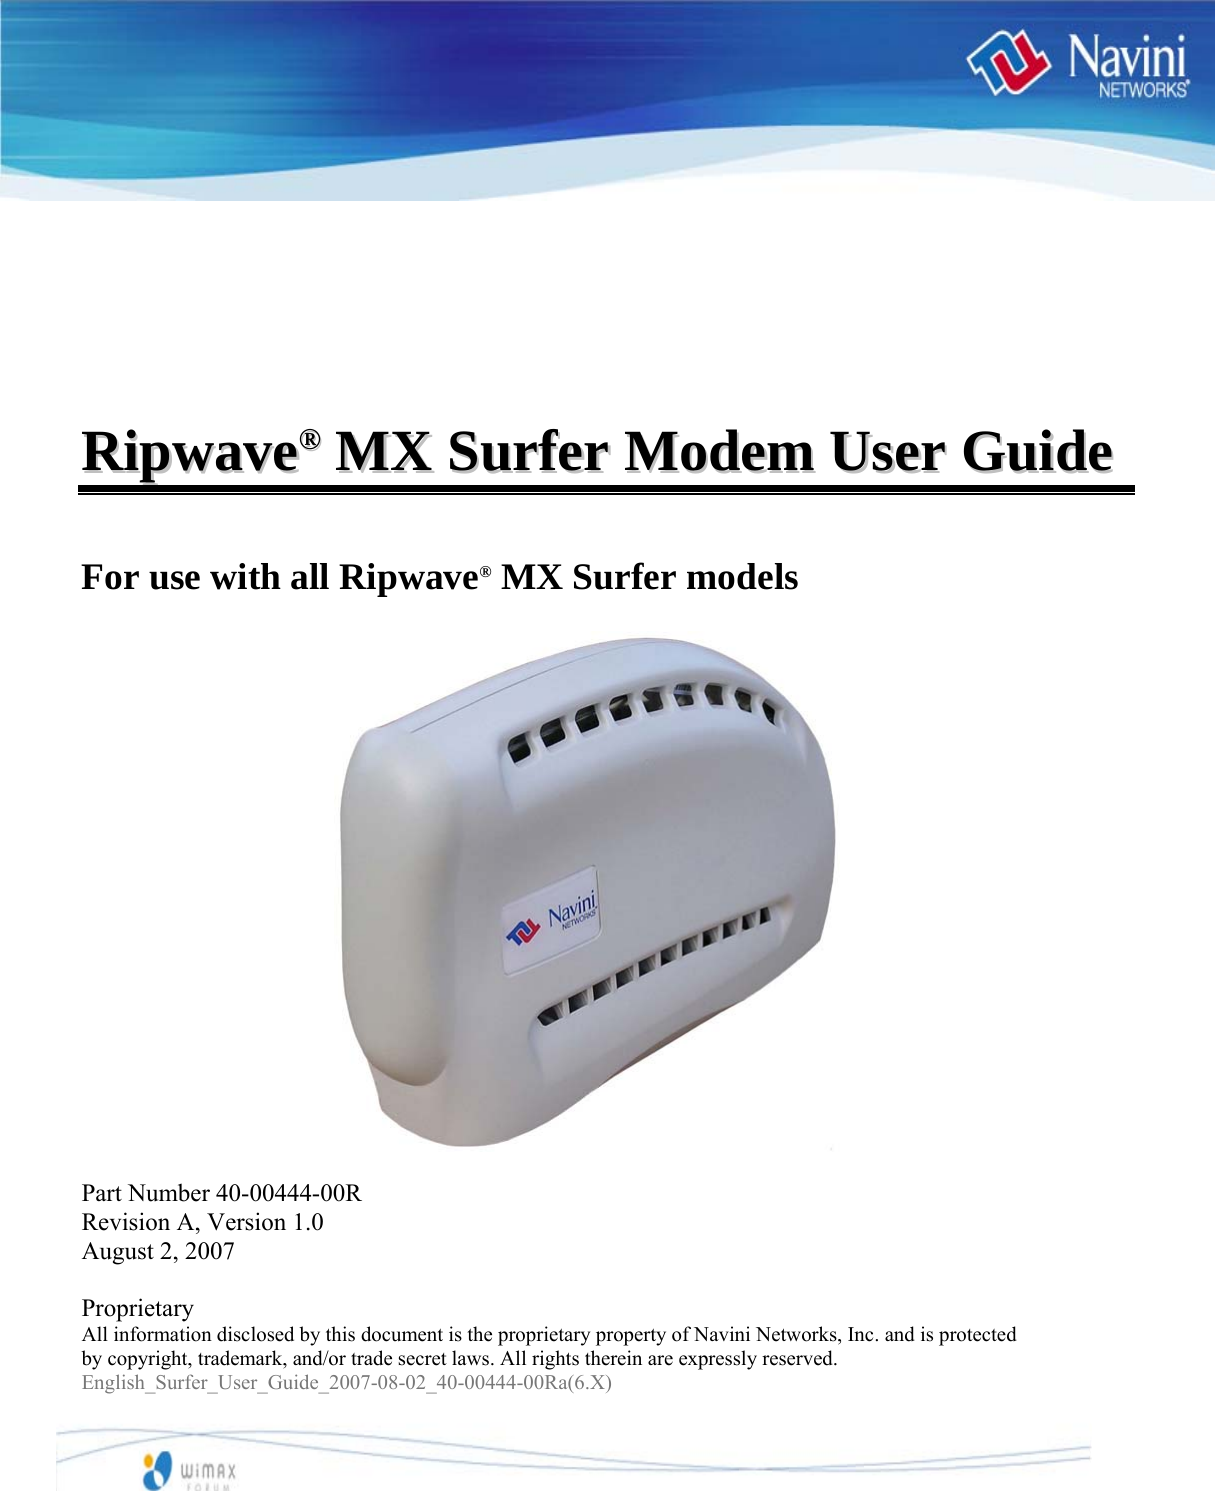           RRiippwwaavvee®®  MMXX  SSuurrffeerr  MMooddeemm  UUsseerr  GGuuiiddee    For use with all Ripwave® MX Surfer models                     Part Number 40-00444-00R Revision A, Version 1.0 August 2, 2007  Proprietary All information disclosed by this document is the proprietary property of Navini Networks, Inc. and is protected  by copyright, trademark, and/or trade secret laws. All rights therein are expressly reserved. English_Surfer_User_Guide_2007-08-02_40-00444-00Ra(6.X)   